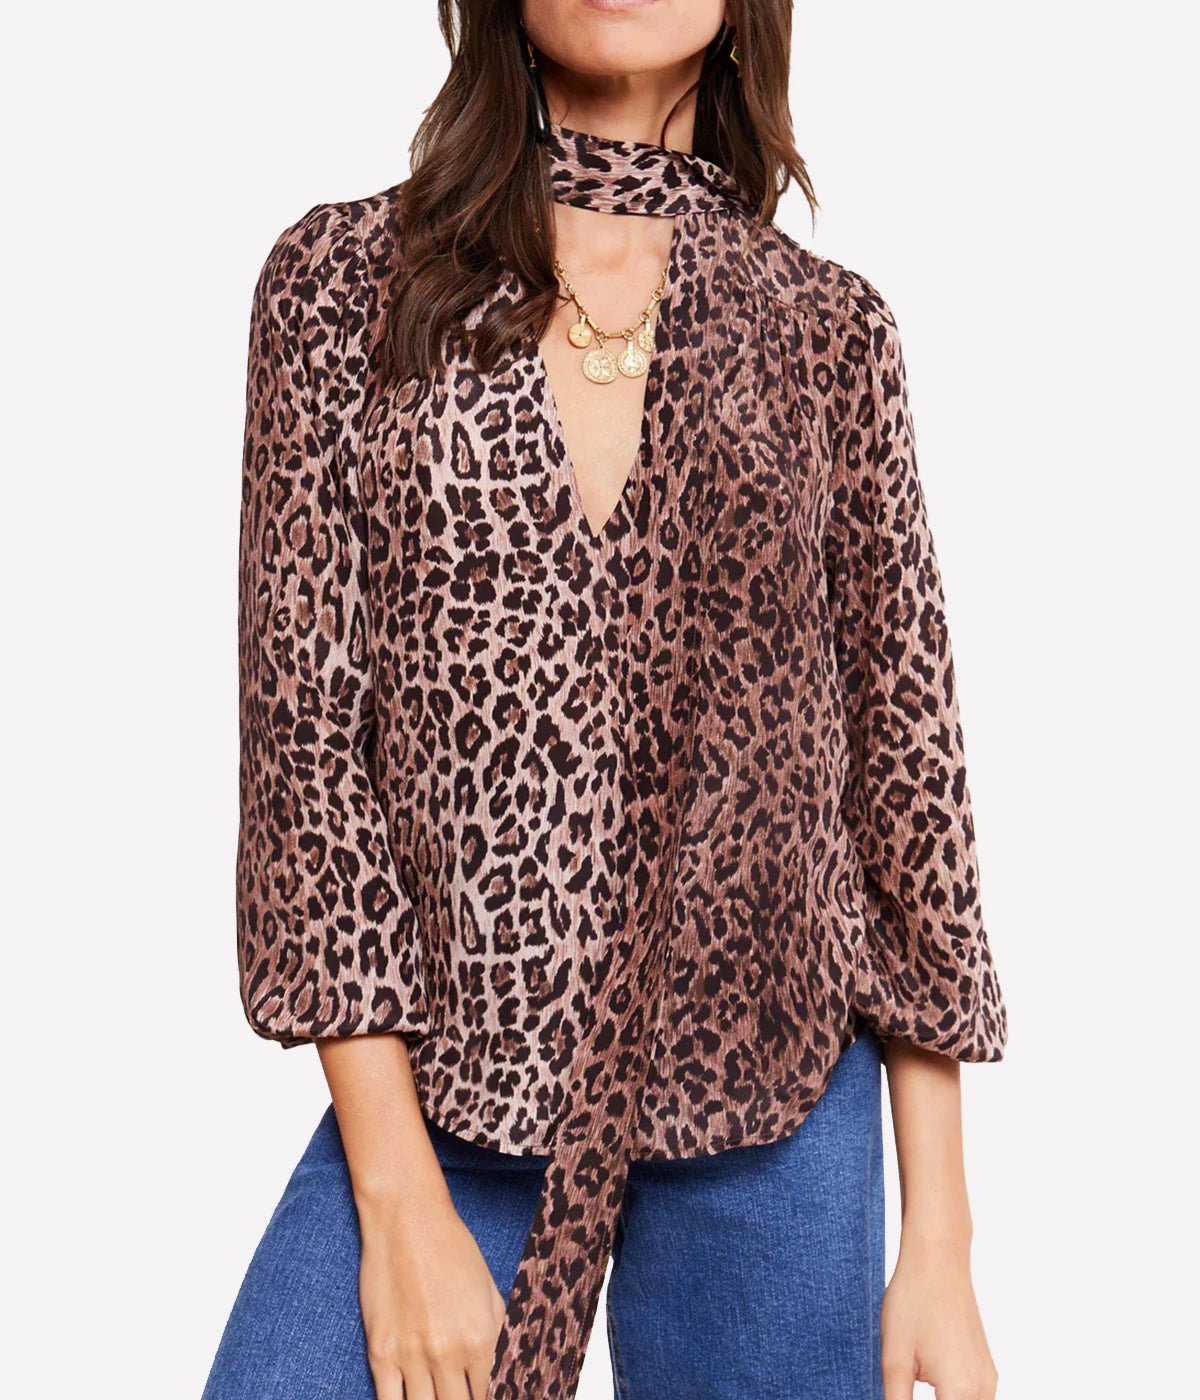 A blouson sleeve blouse with shoulder gathers, the Moss Top by RIXO is vintage inspired and versatile. A stunning leopard print, this bra-friendly top will take you from day to night. 